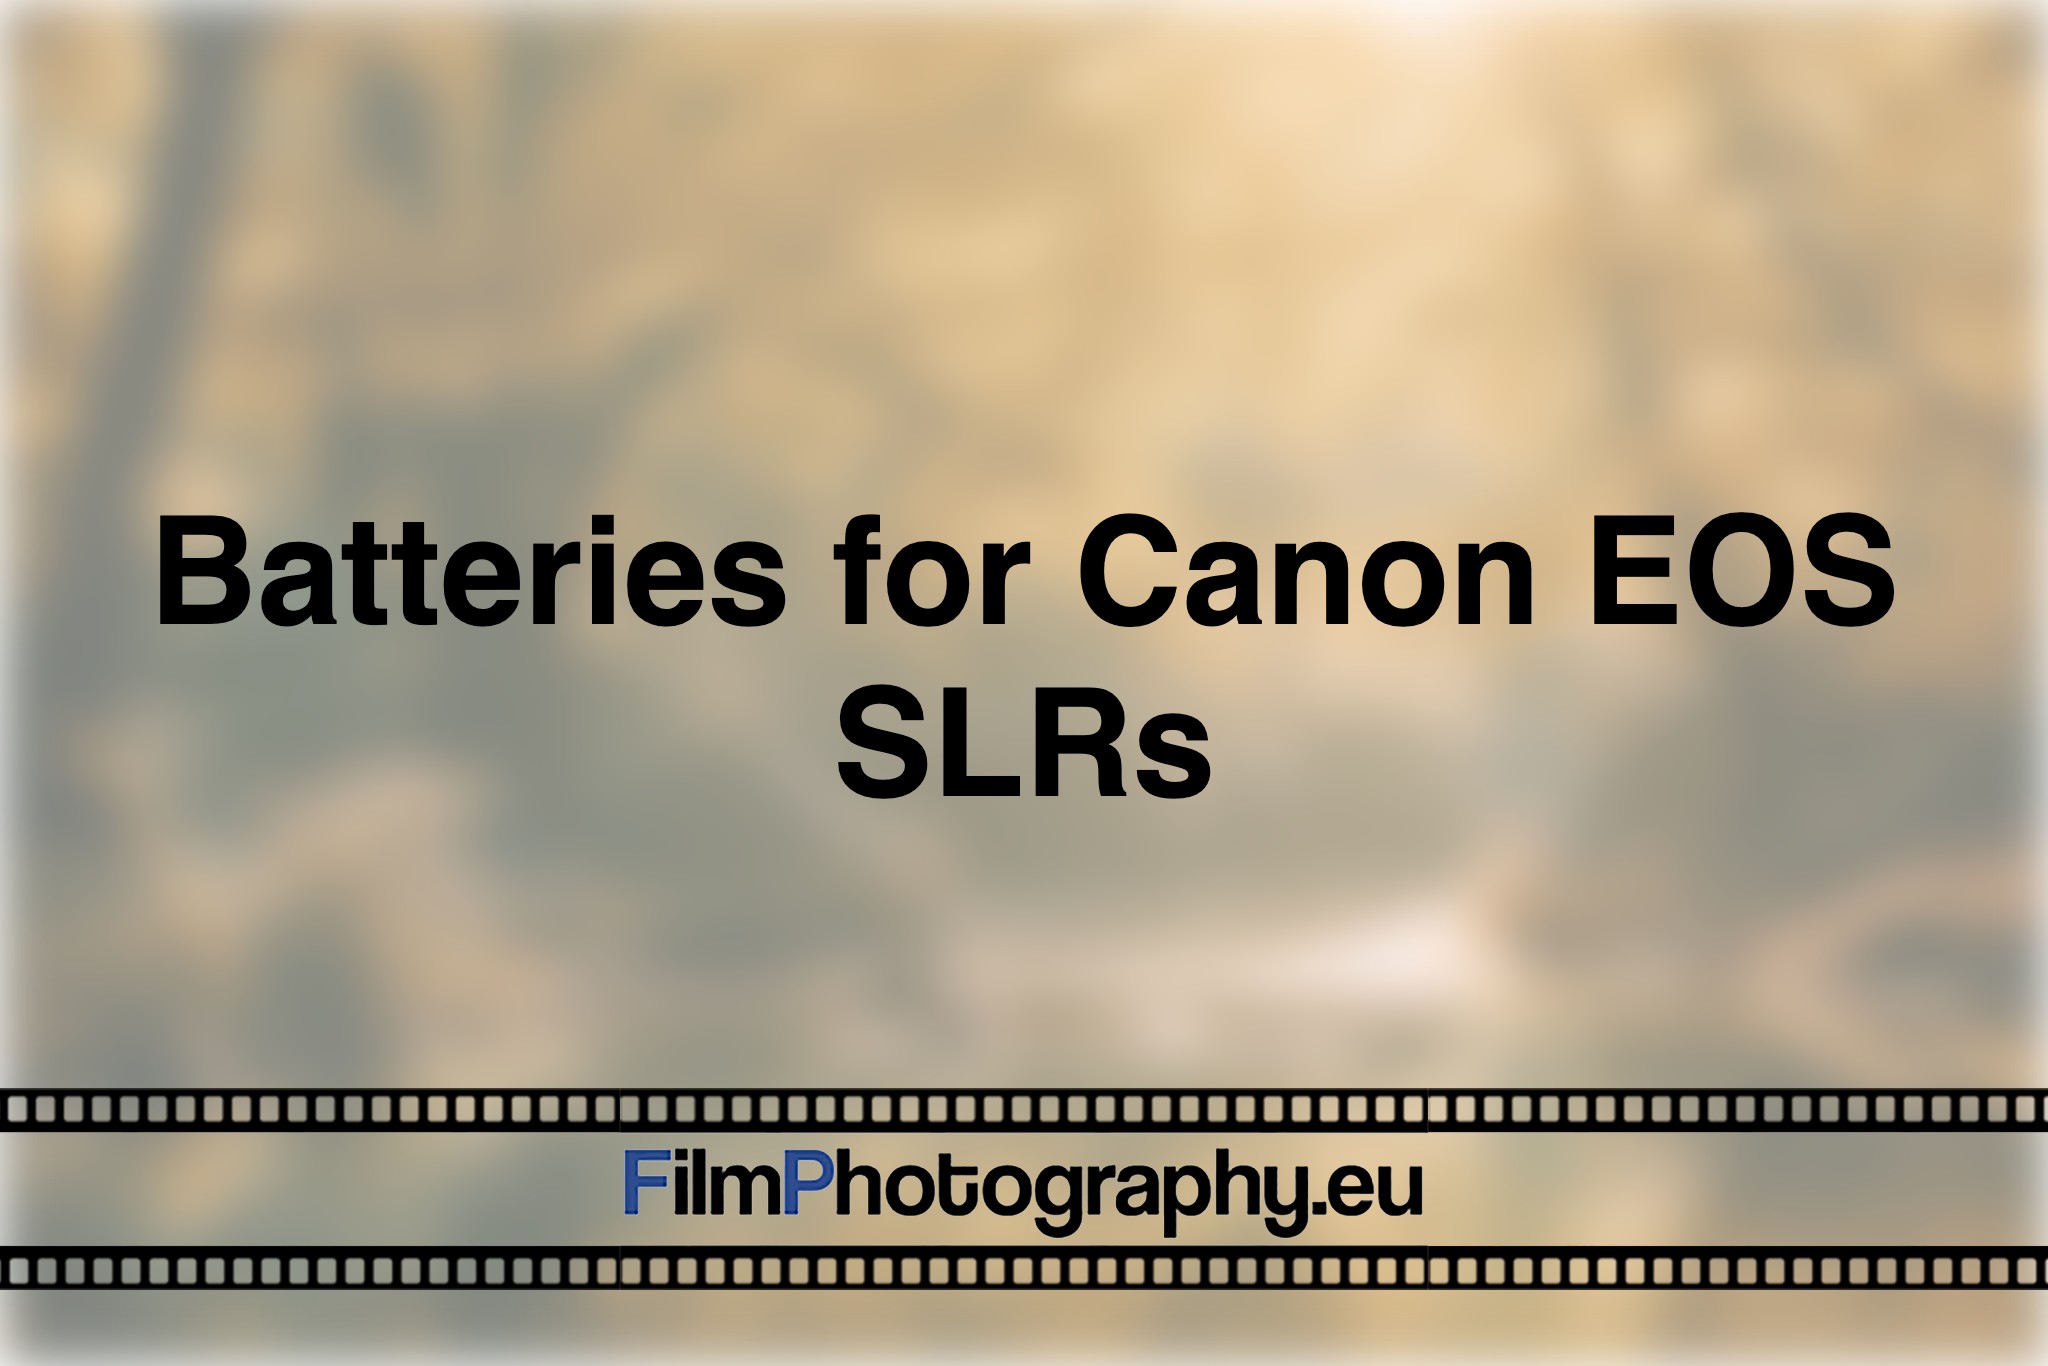 batteries-for-canon-eos-slrs-photo-bnv